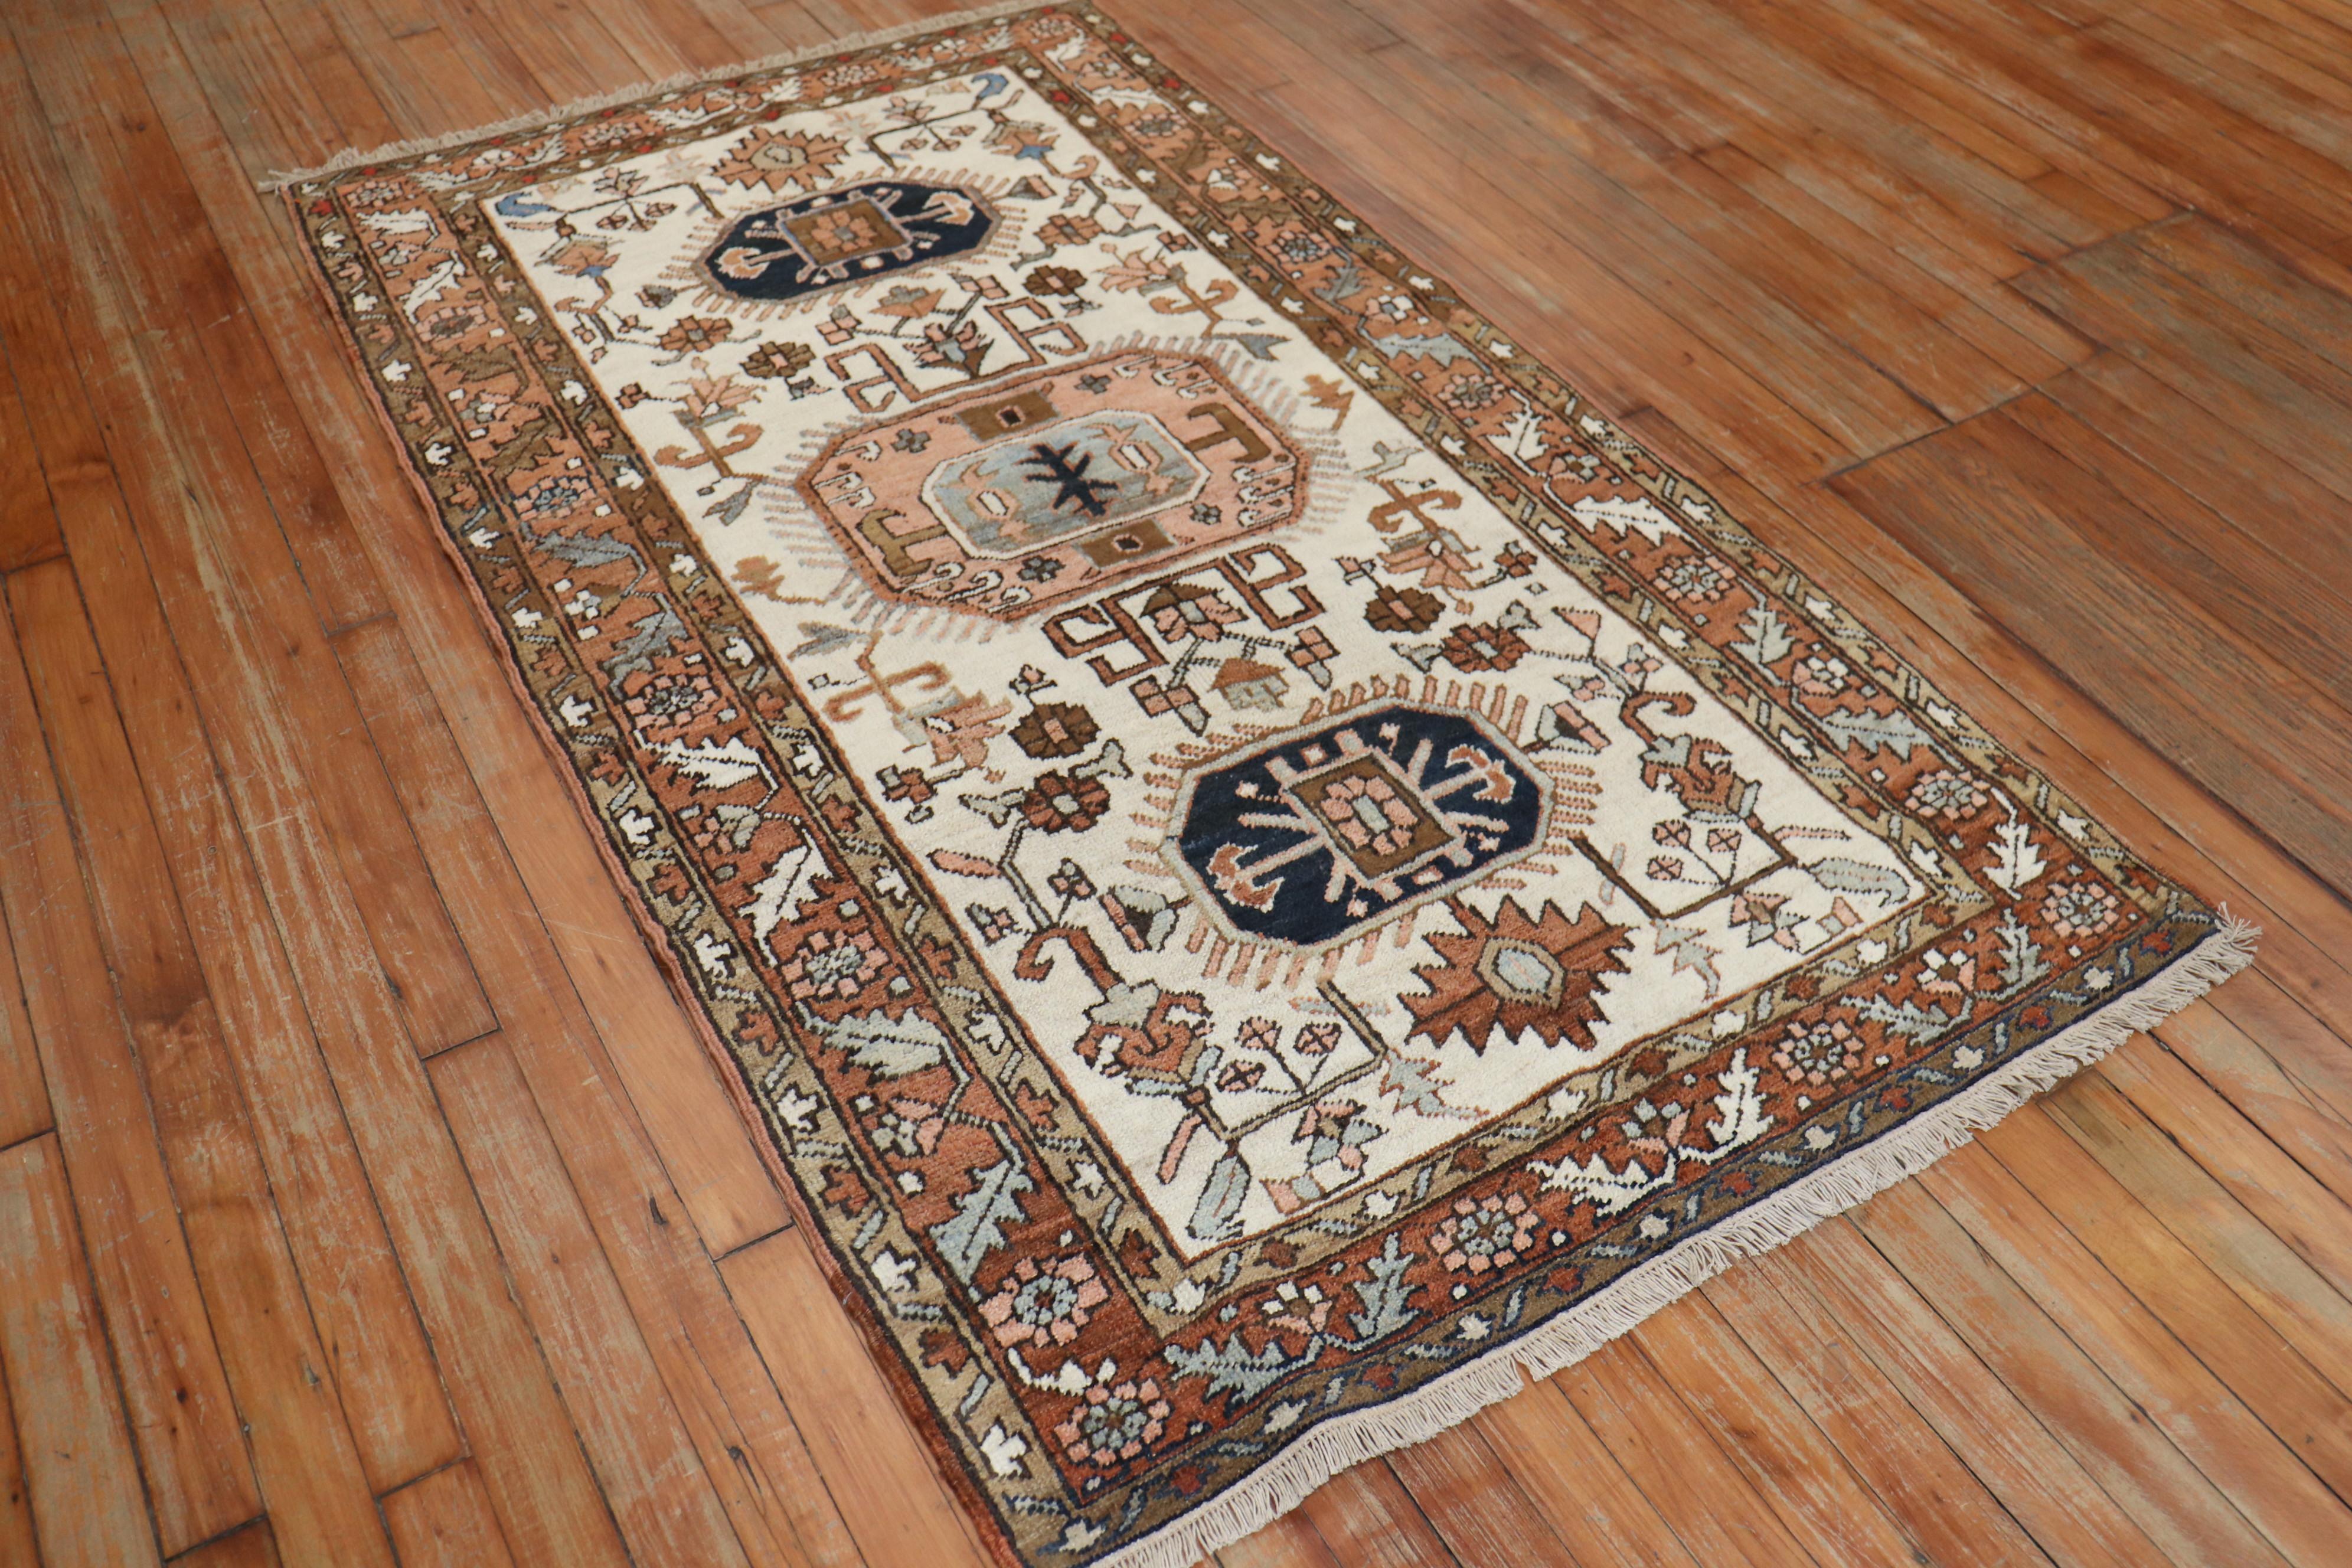 Persian Heriz tribal scatter rug consisting of an ivory field with dominant accents in brown

Measures: 3'3” x 5'11”.